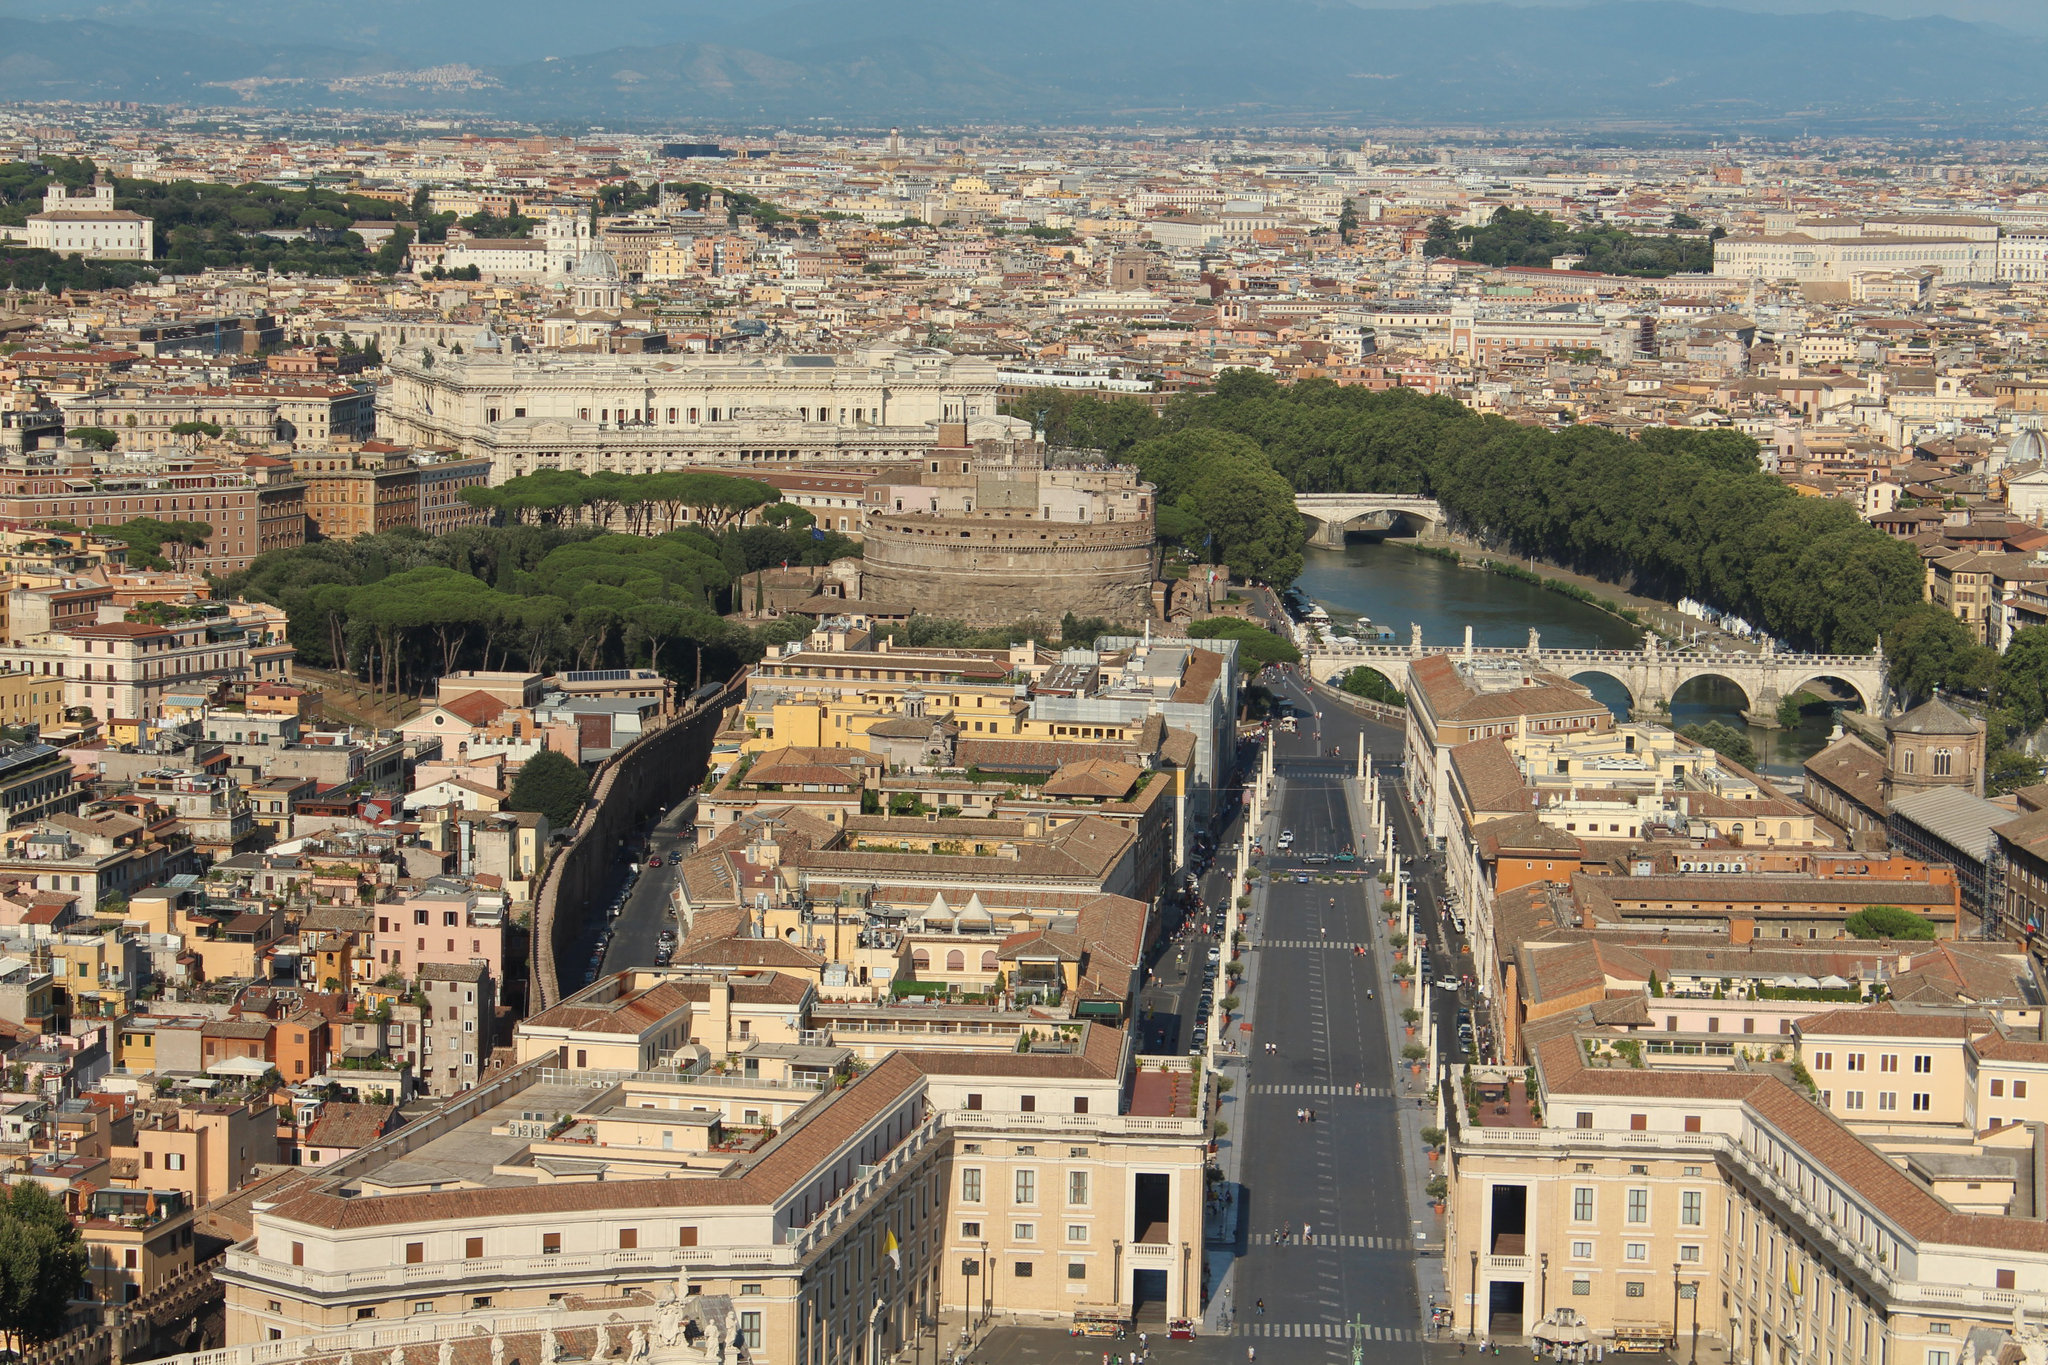 St Peter’s – Rome View